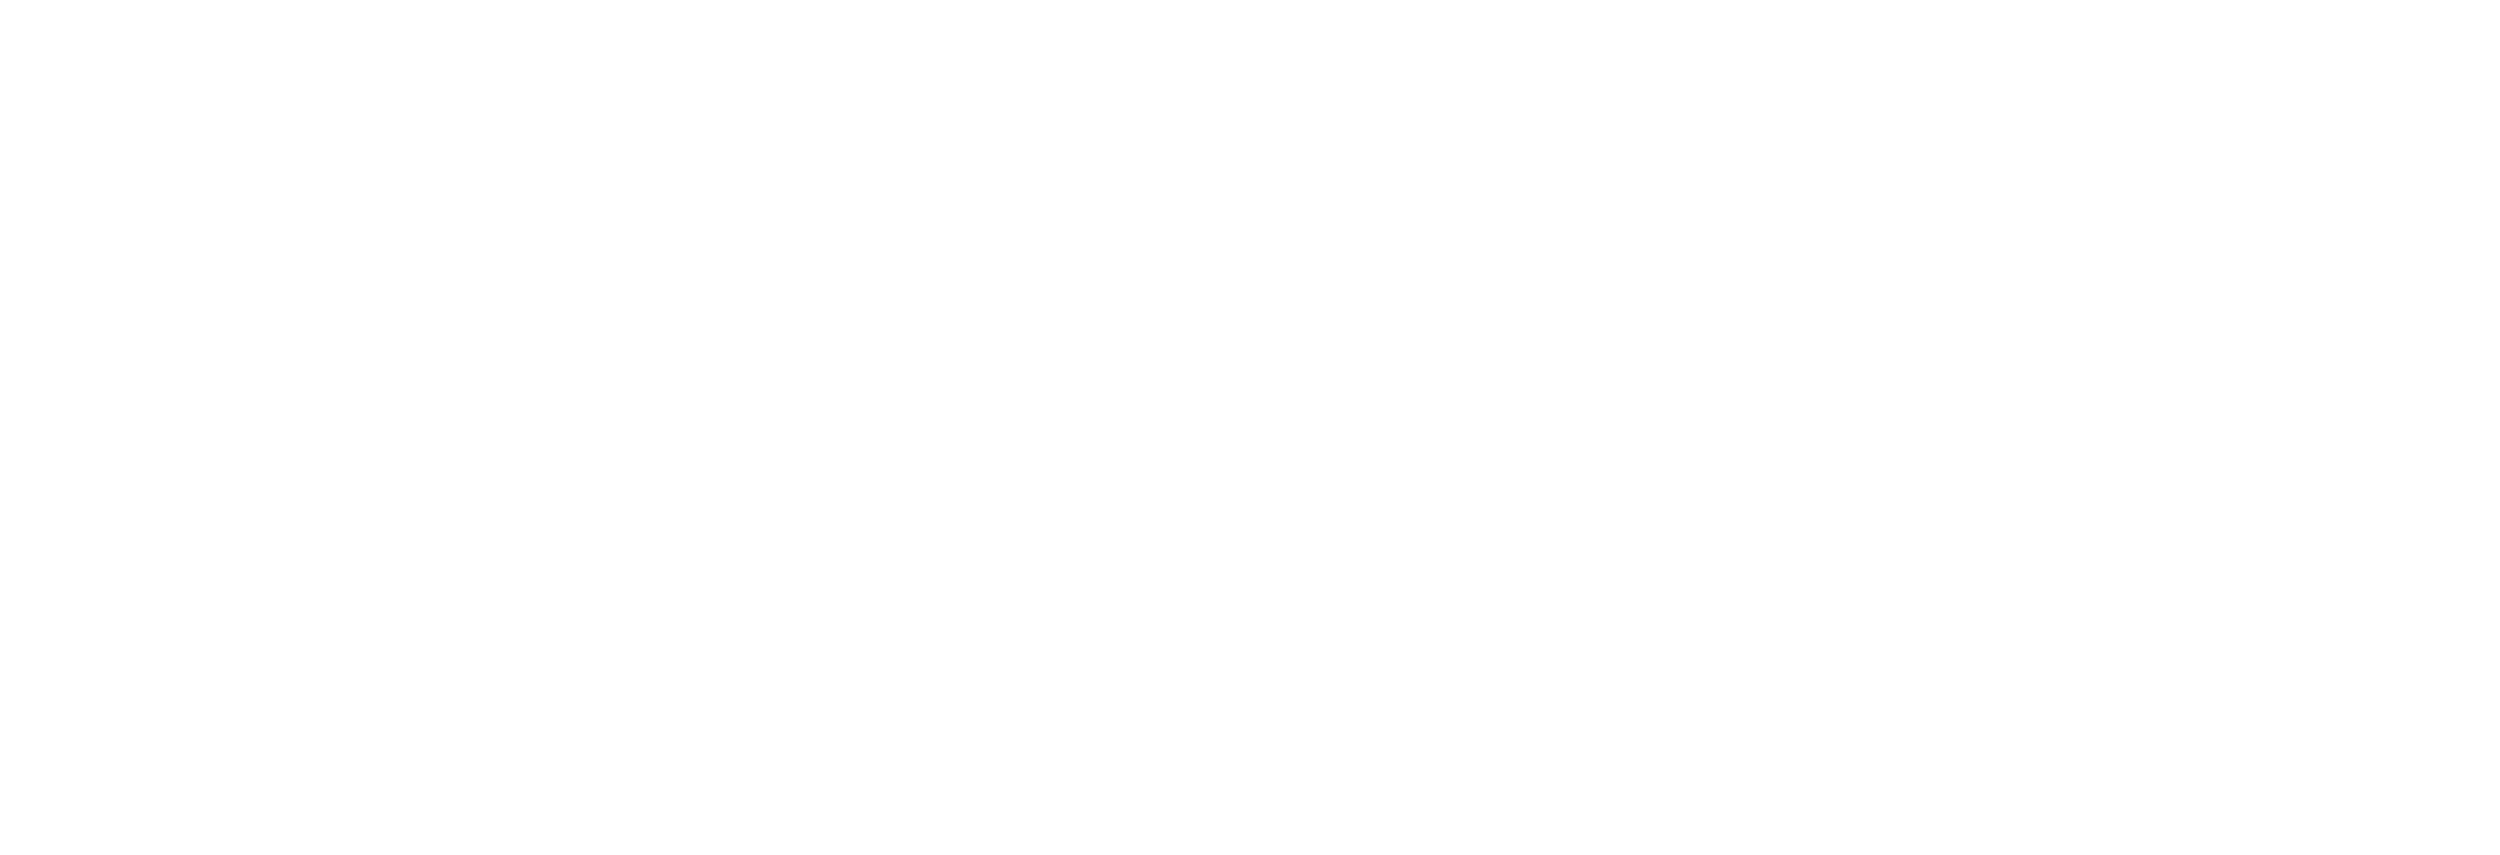 founders and friends logo